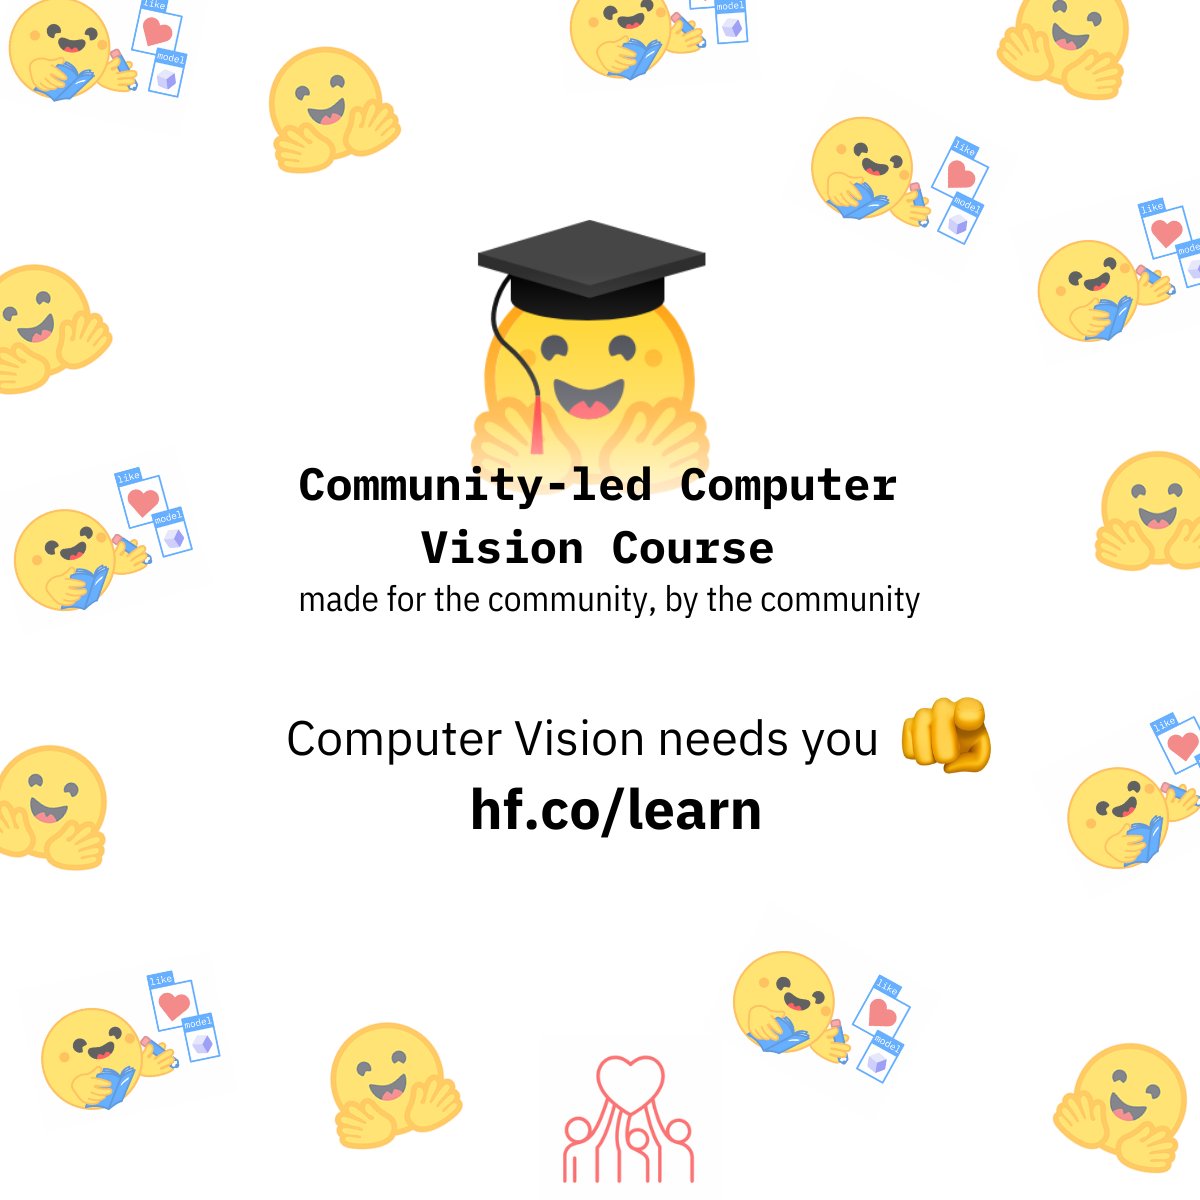 💫 Computer Vision Community Course now LIVE! 

From the awesome @huggingface🤗 folks + many amazing people from the computer vision community, comes the greatest computer vision course in the entire galaxy 🌌

This course banner was designed by the fantastic @bisnotforbella